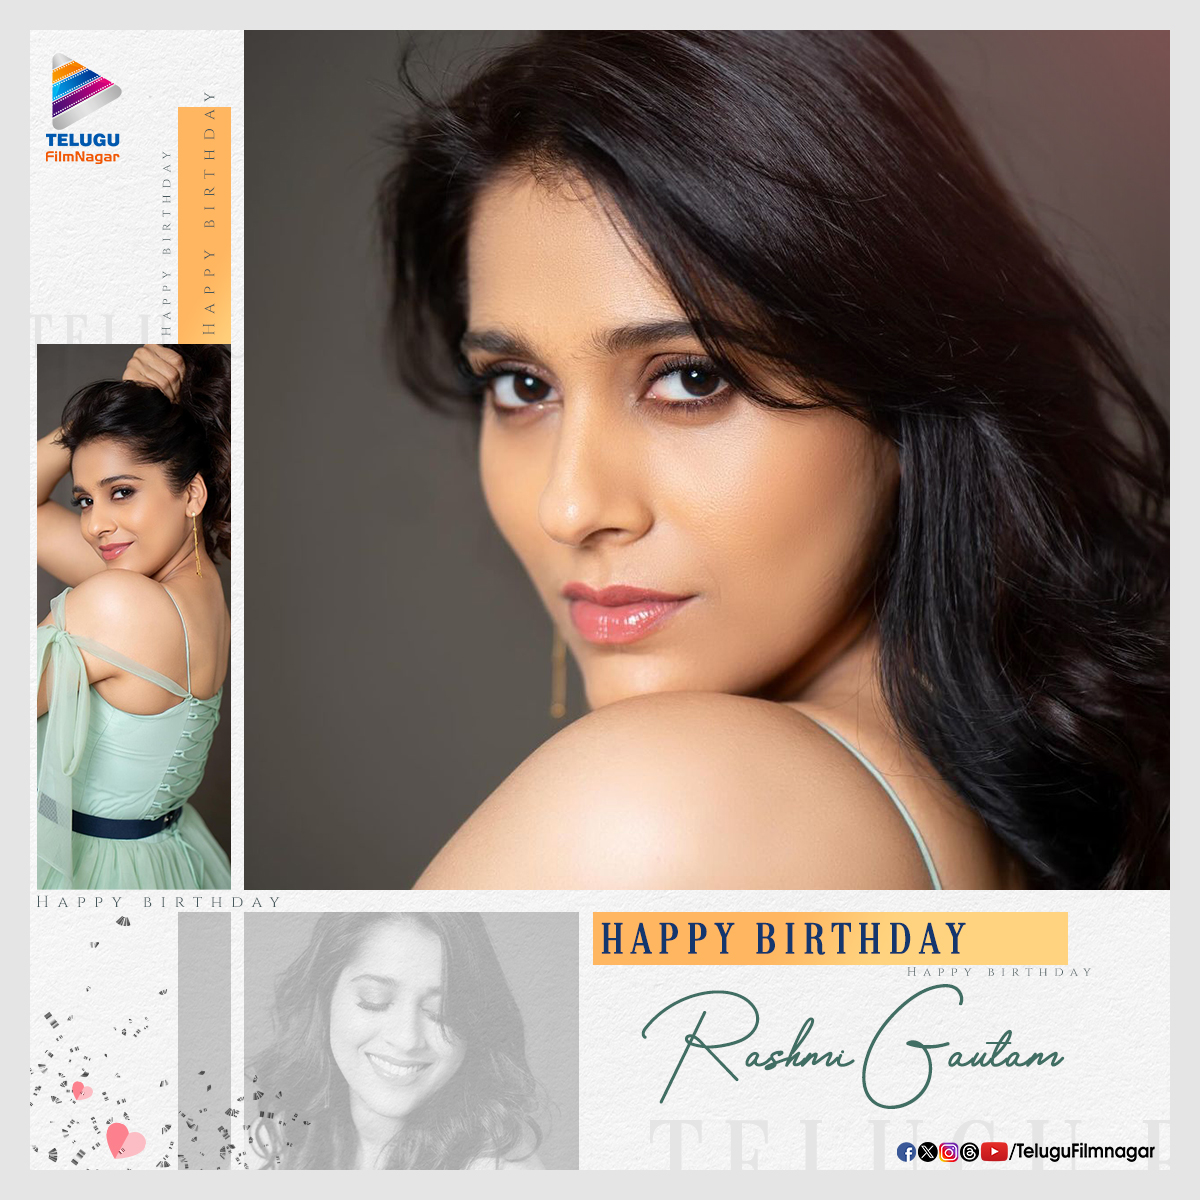 Sending out our Birthday Wishes to the beautiful actress and energetic host @rashmigautam27! 🎉
Hope you have a splendid and successful year ahead!! 💖🎁

#HappyBirthdayRashmiGautham #HBDRashmiGautam #TFNWishes #TeluguFilmNagar